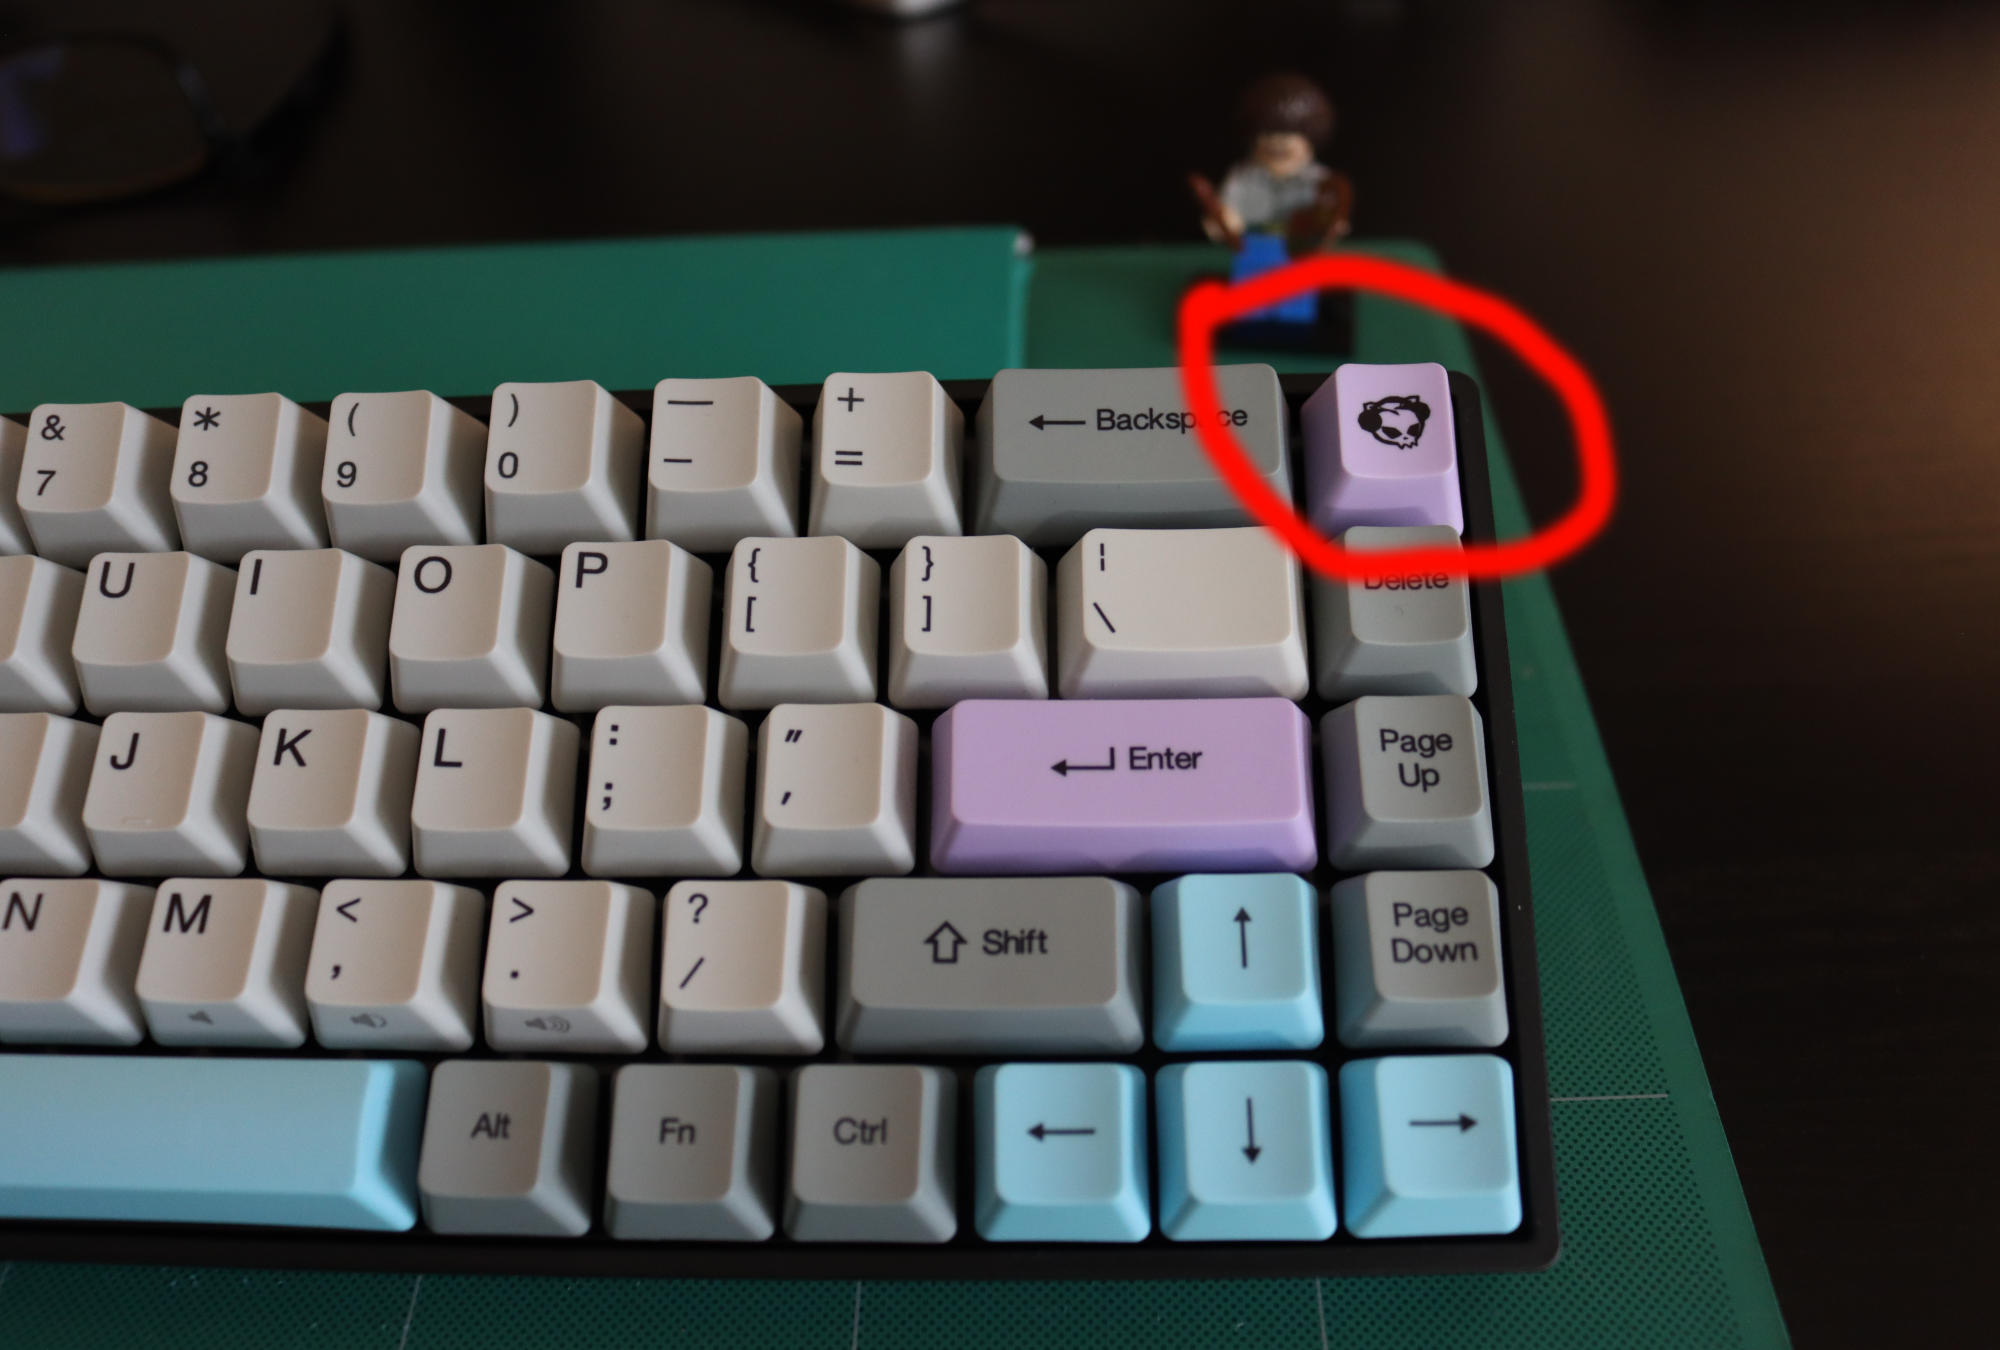 Tilde key is placed on the far top right of the Akko 3068 keyboard